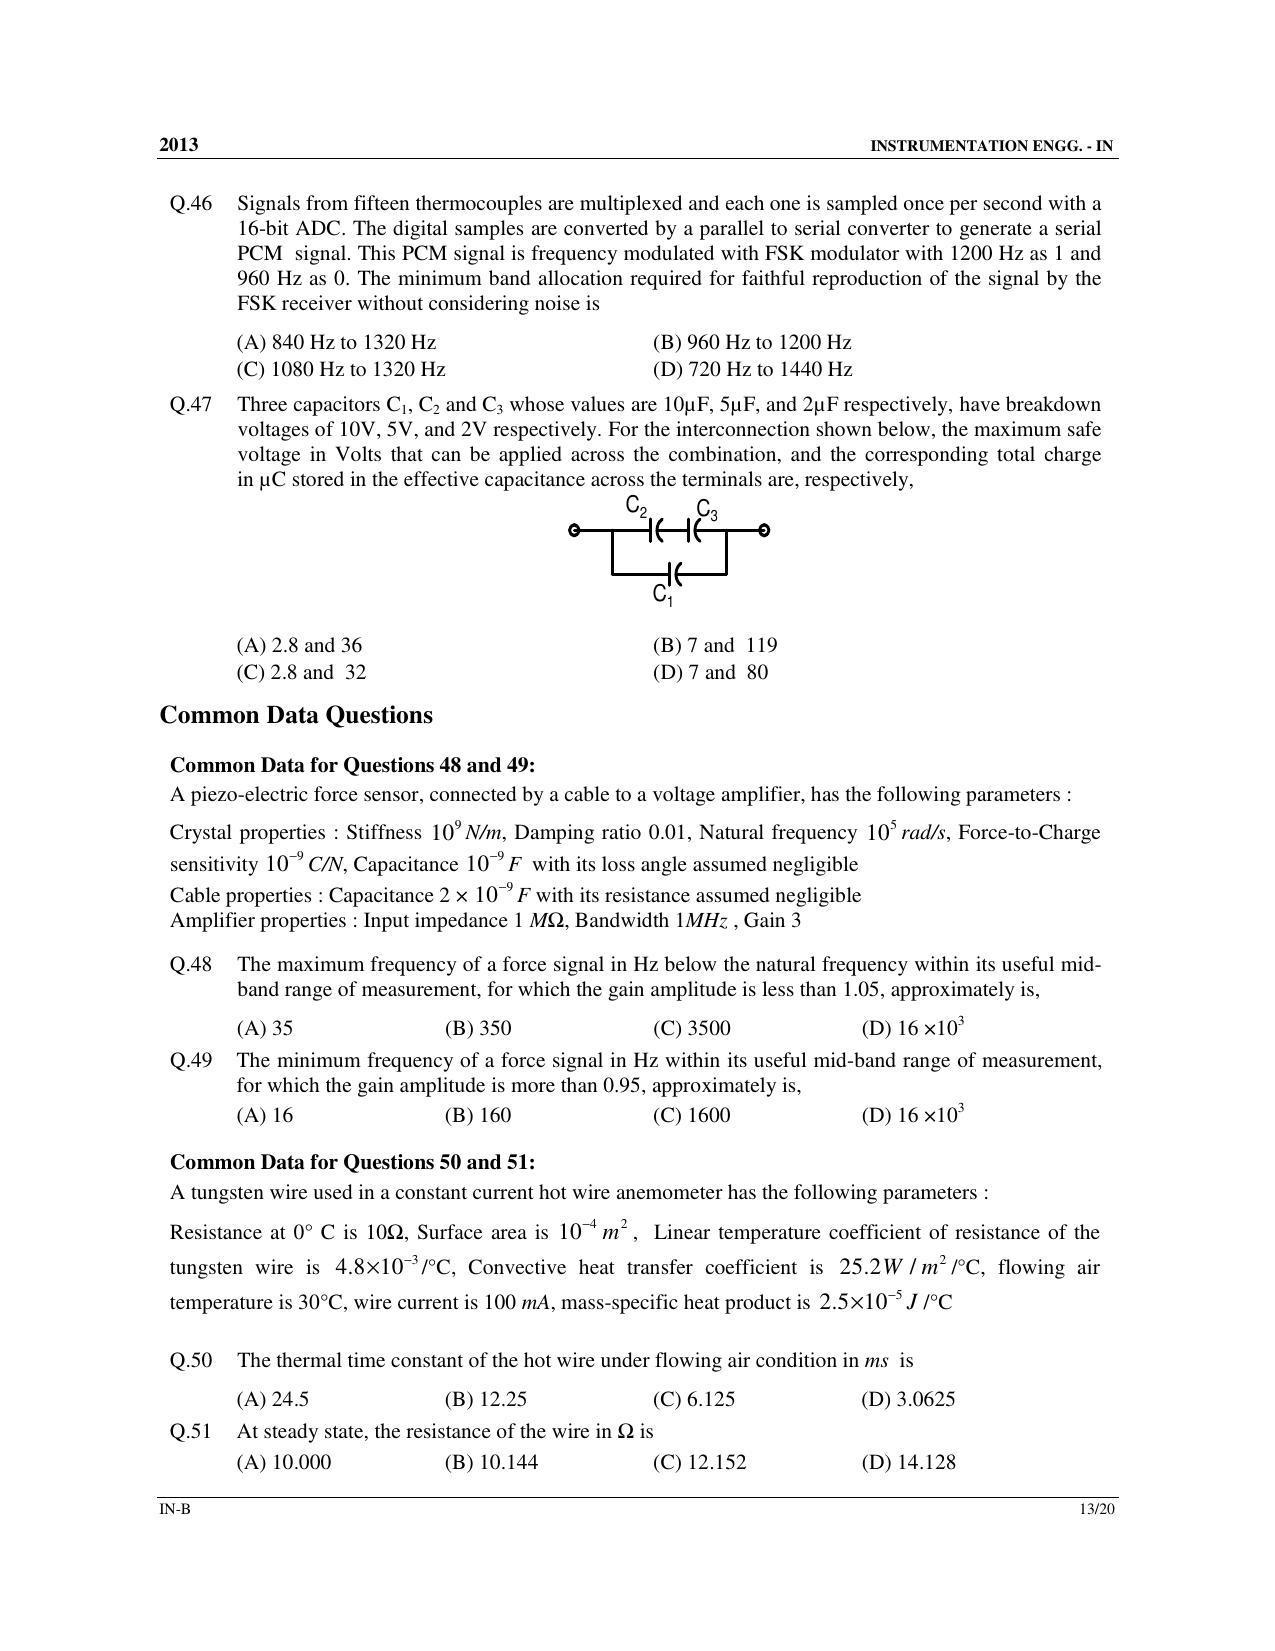 GATE 2013 Instrumentation Engineering (IN) Question Paper with Answer Key - Page 31